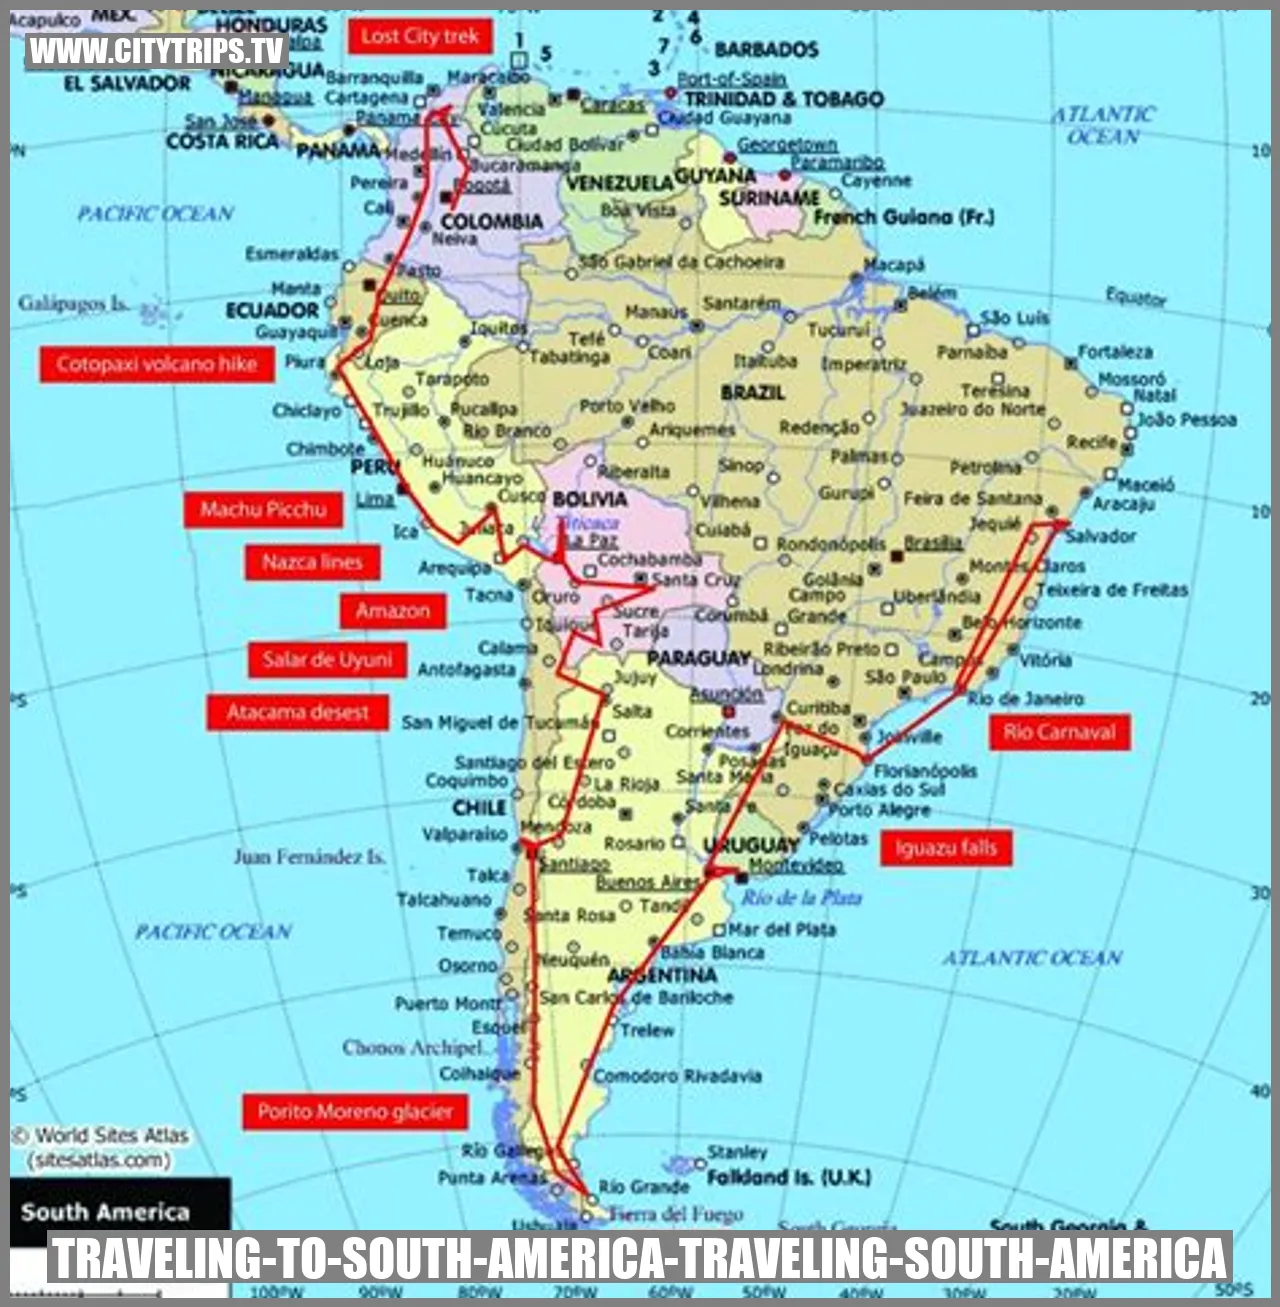 Traveling to South America